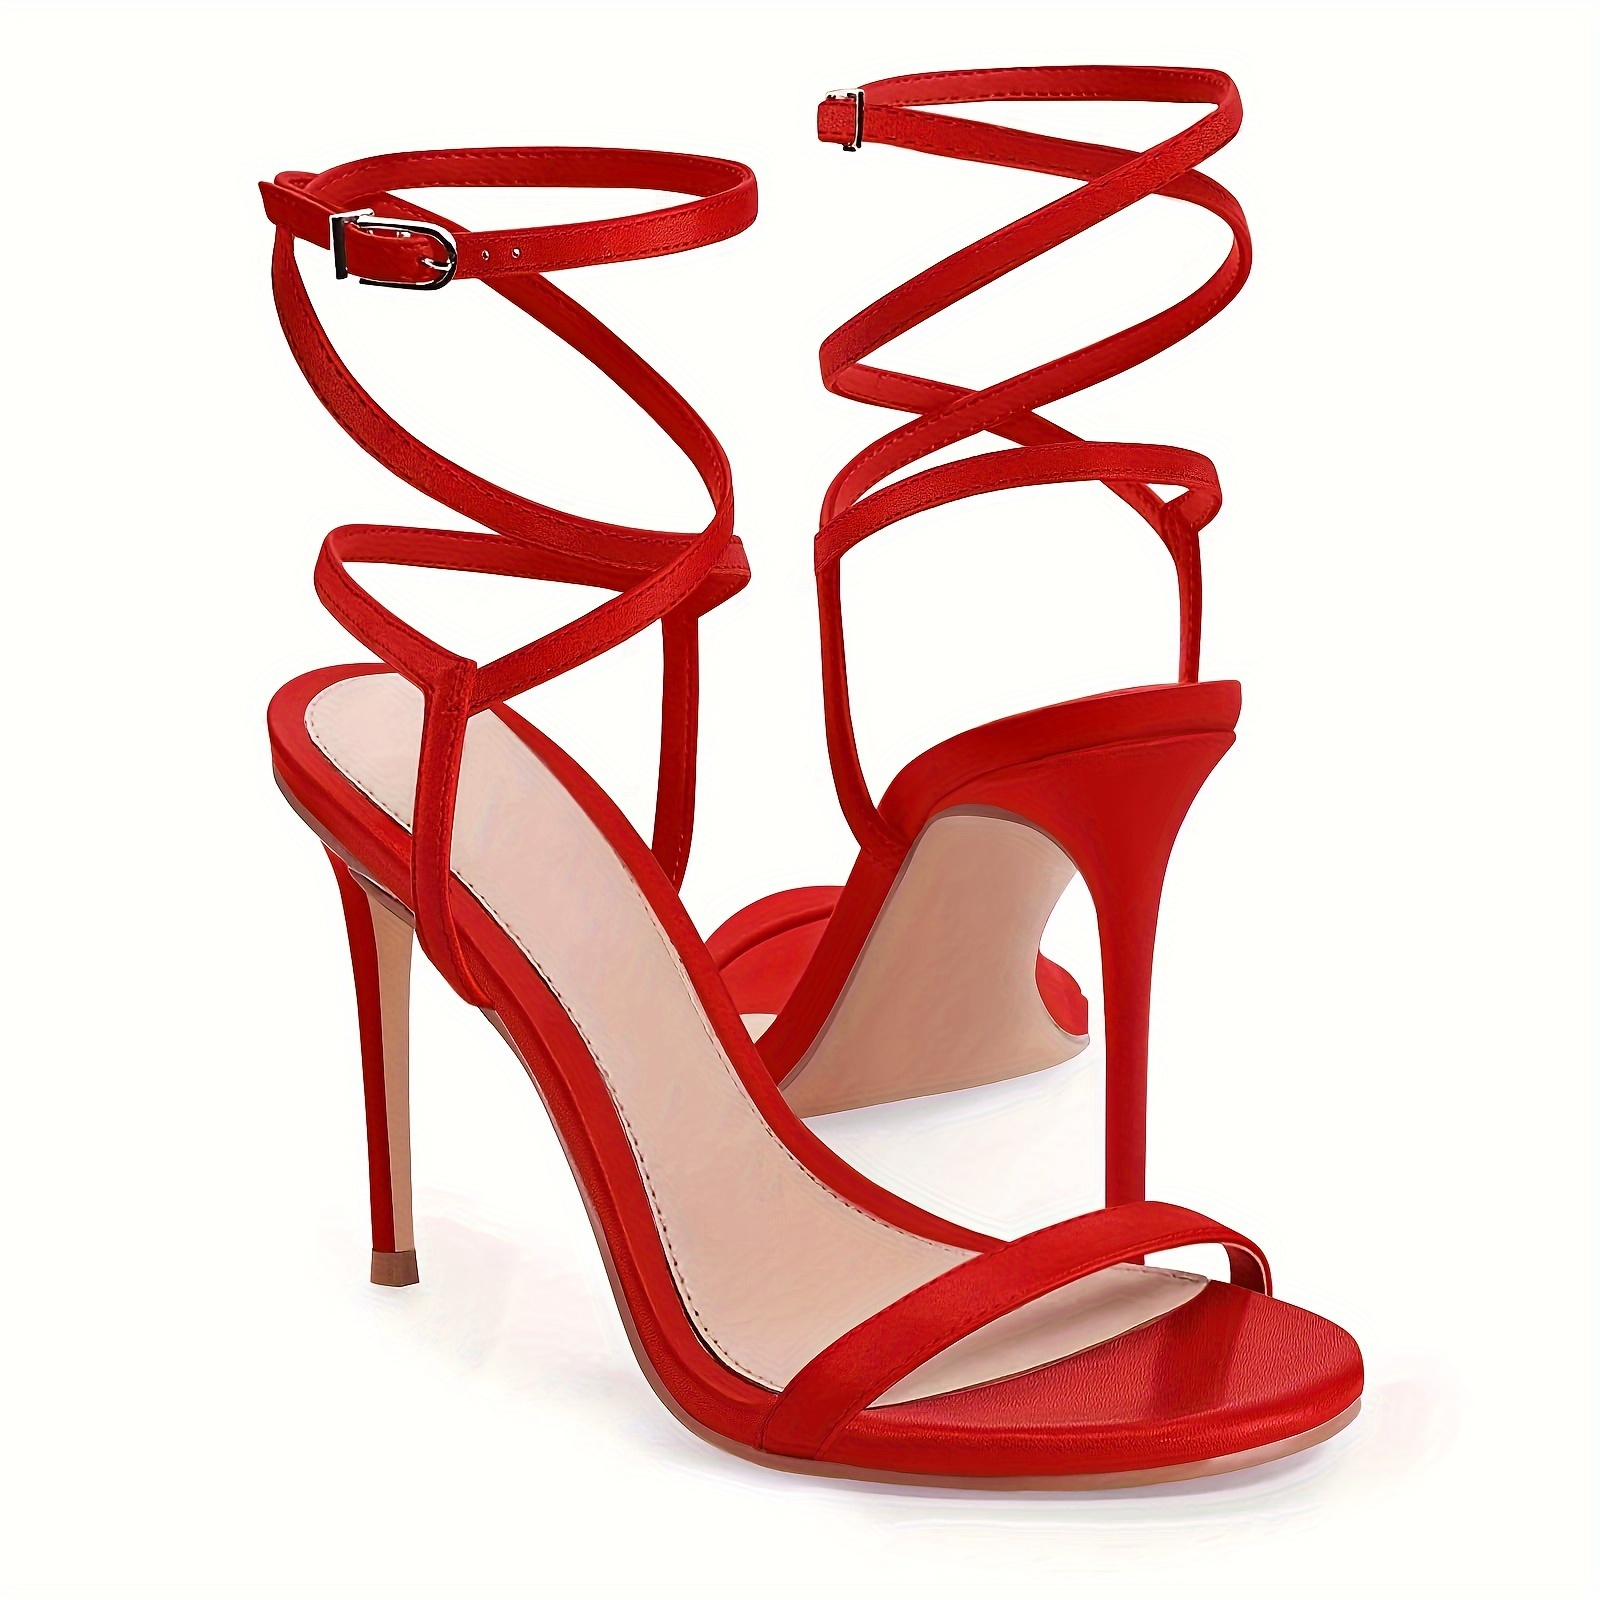 

Women's Red Strappy High Heel Sandals, Ankle Strap Summer Dress Shoes, Faux Leather Material, Elegant Footwear For Evening Events